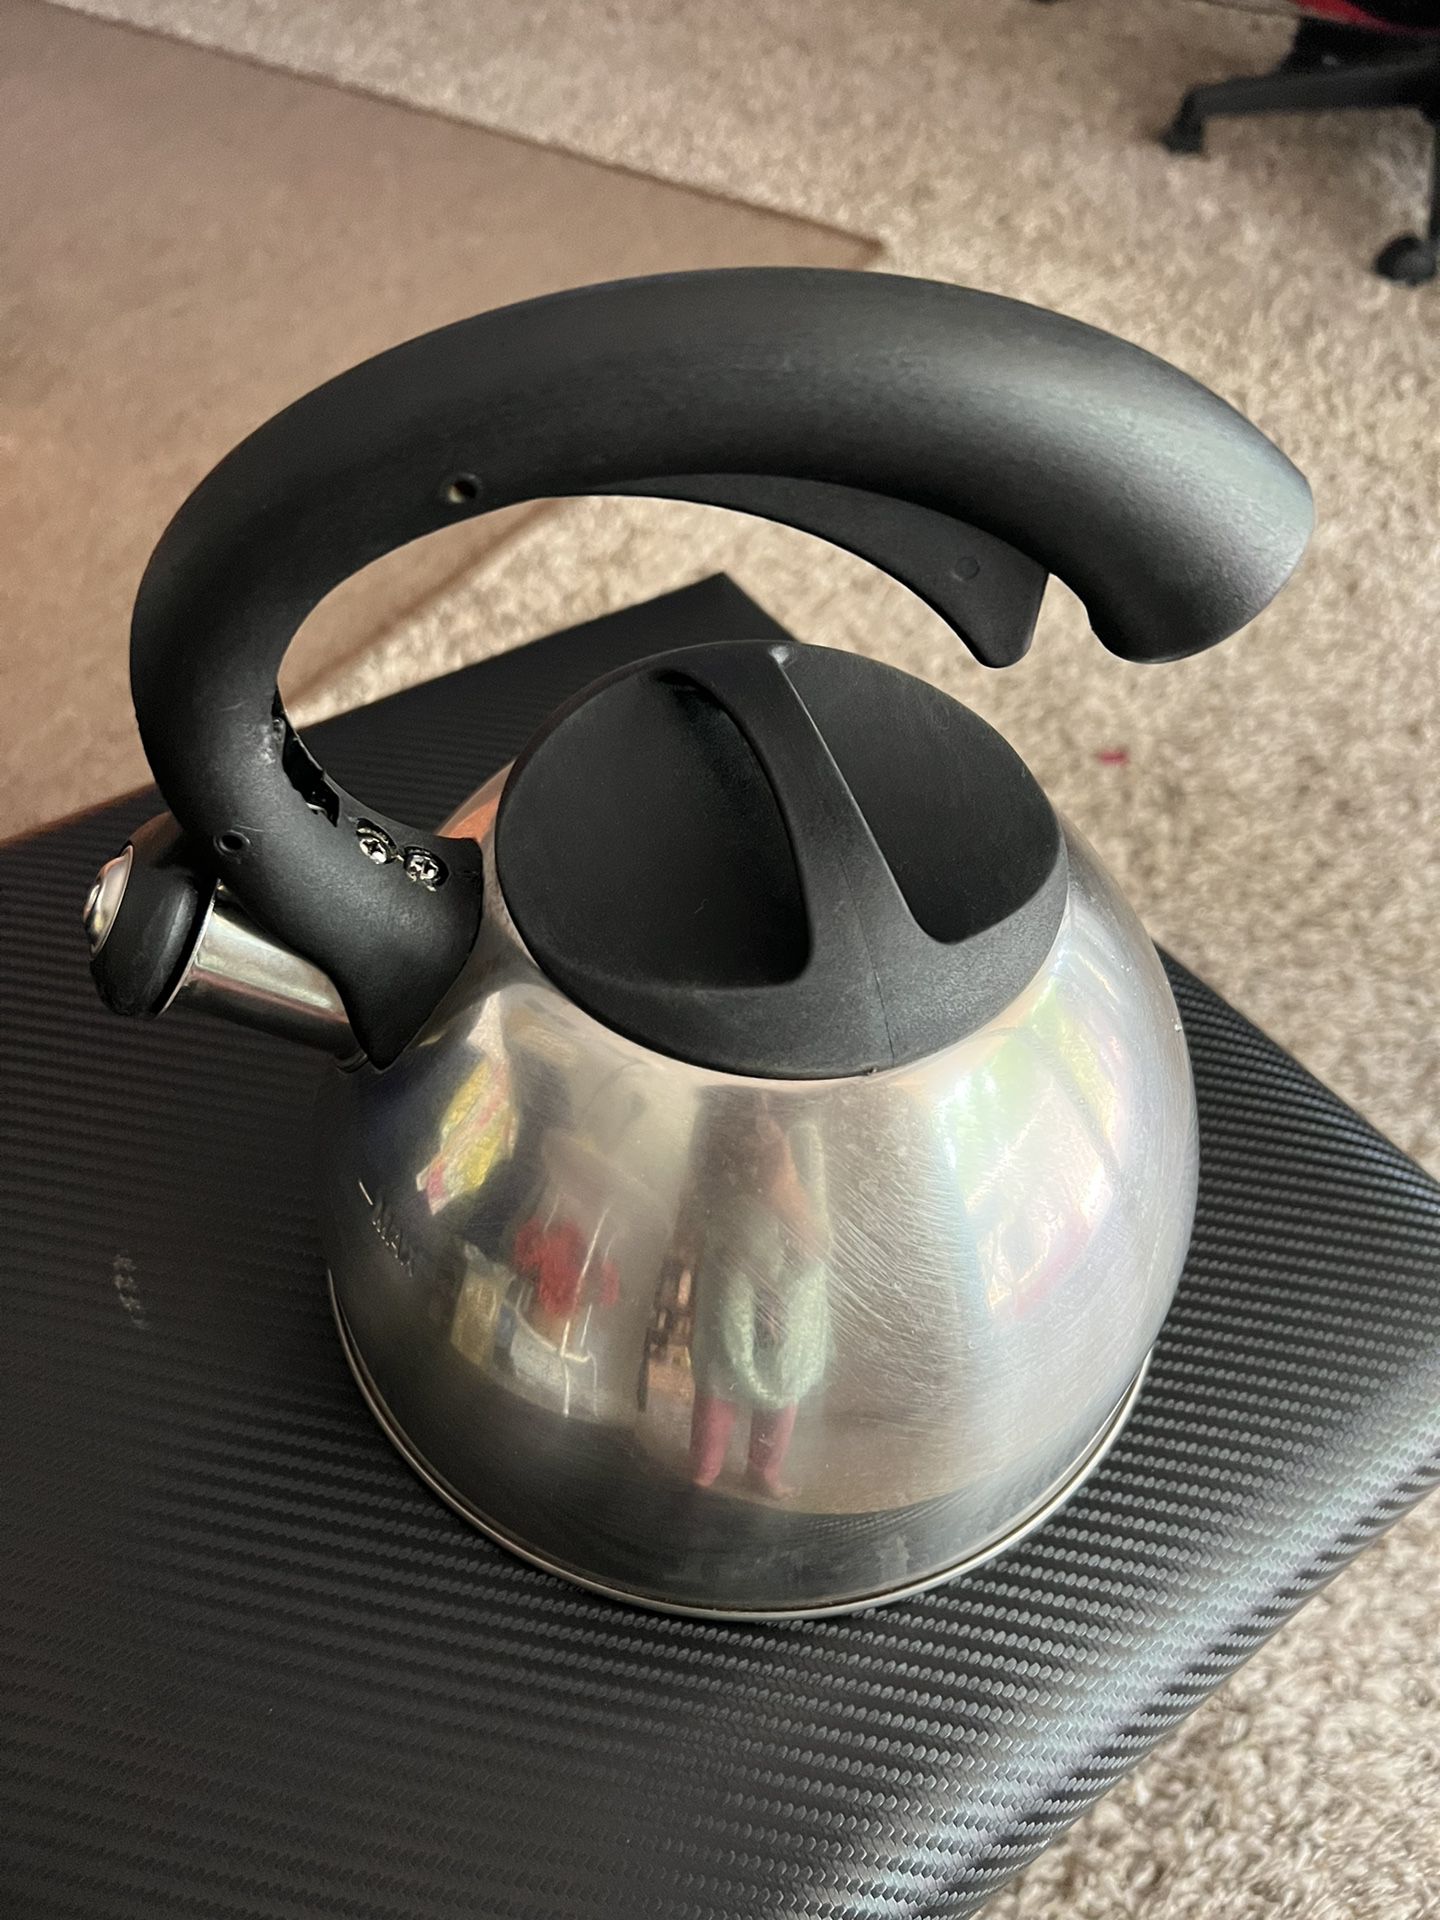 Copco Tea Kettle for Sale in Princeton, NC - OfferUp